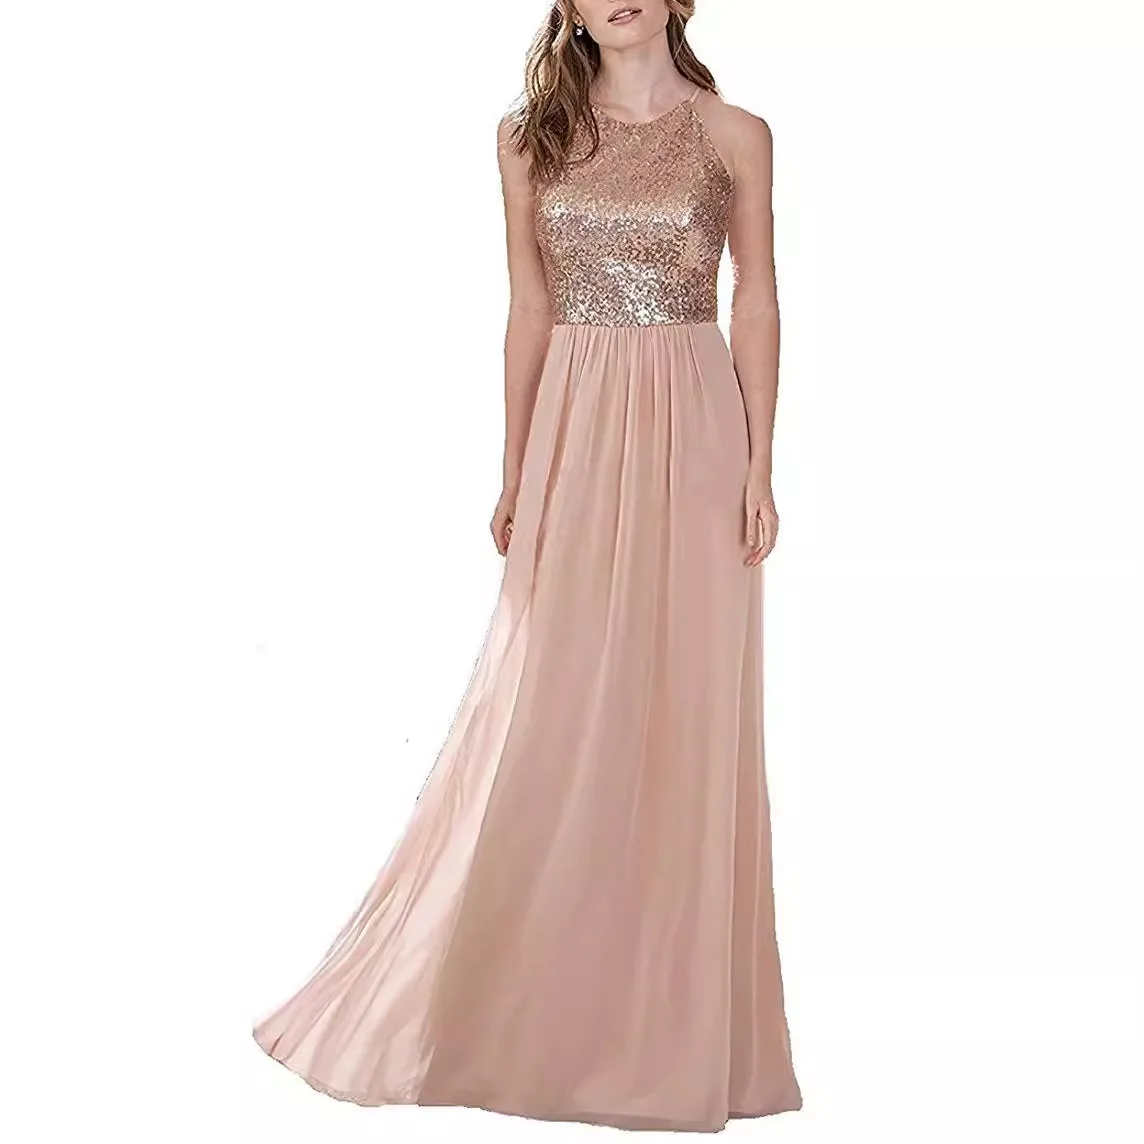 

2 Style Rose Gold Bridesmaid Dresses A Line Spaghetti Backless Sequins Chiffon Long Beach Wedding Gust Dress Maid of Honor Gown